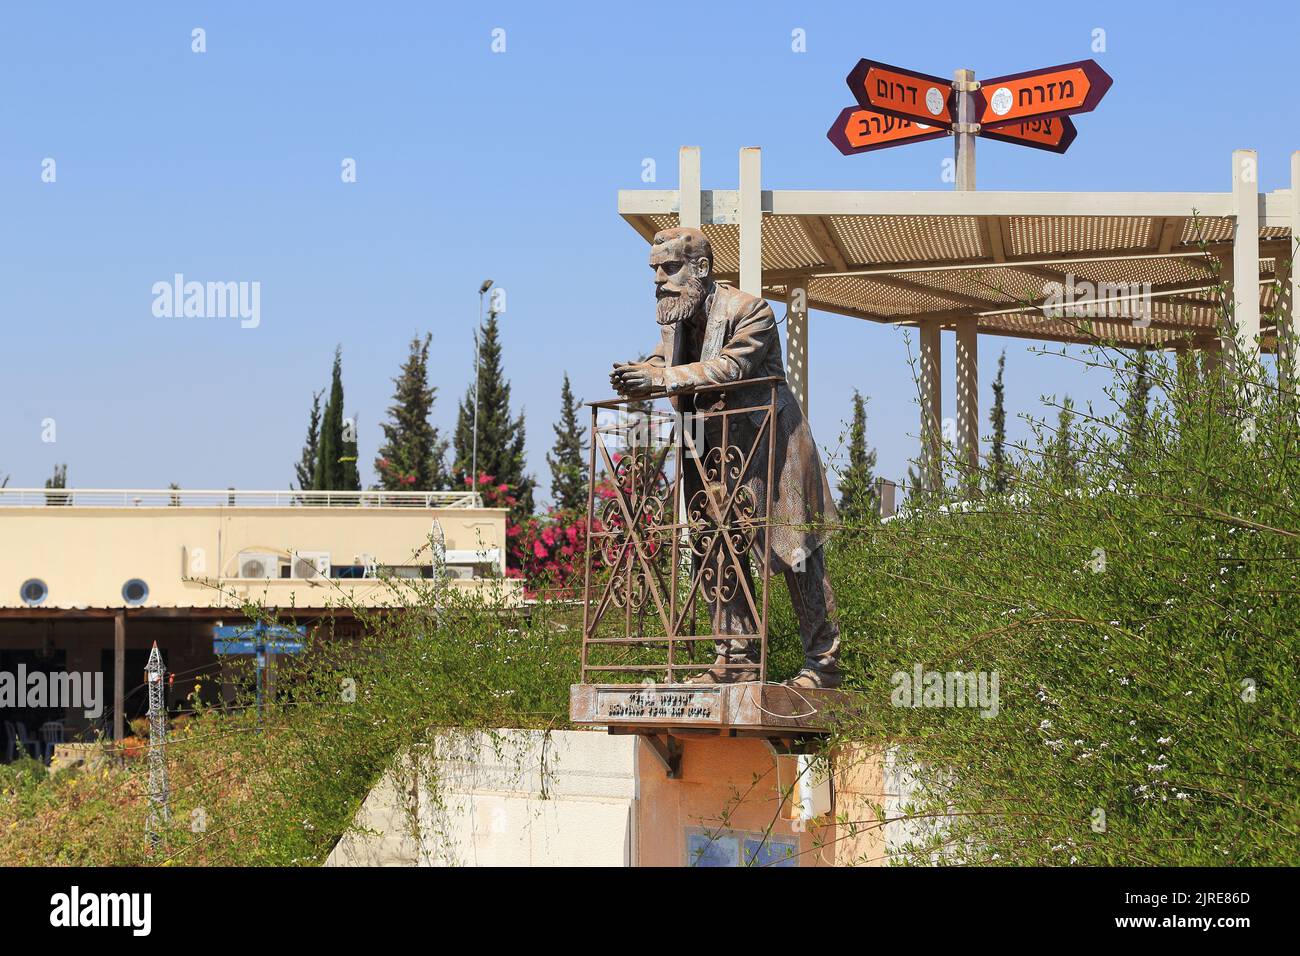 LATRUN, ISRAEL - SEPTEMBER 18, 2017: This is the monument to Theodor Herzl in the Mini Israel Miniature Park. Stock Photo